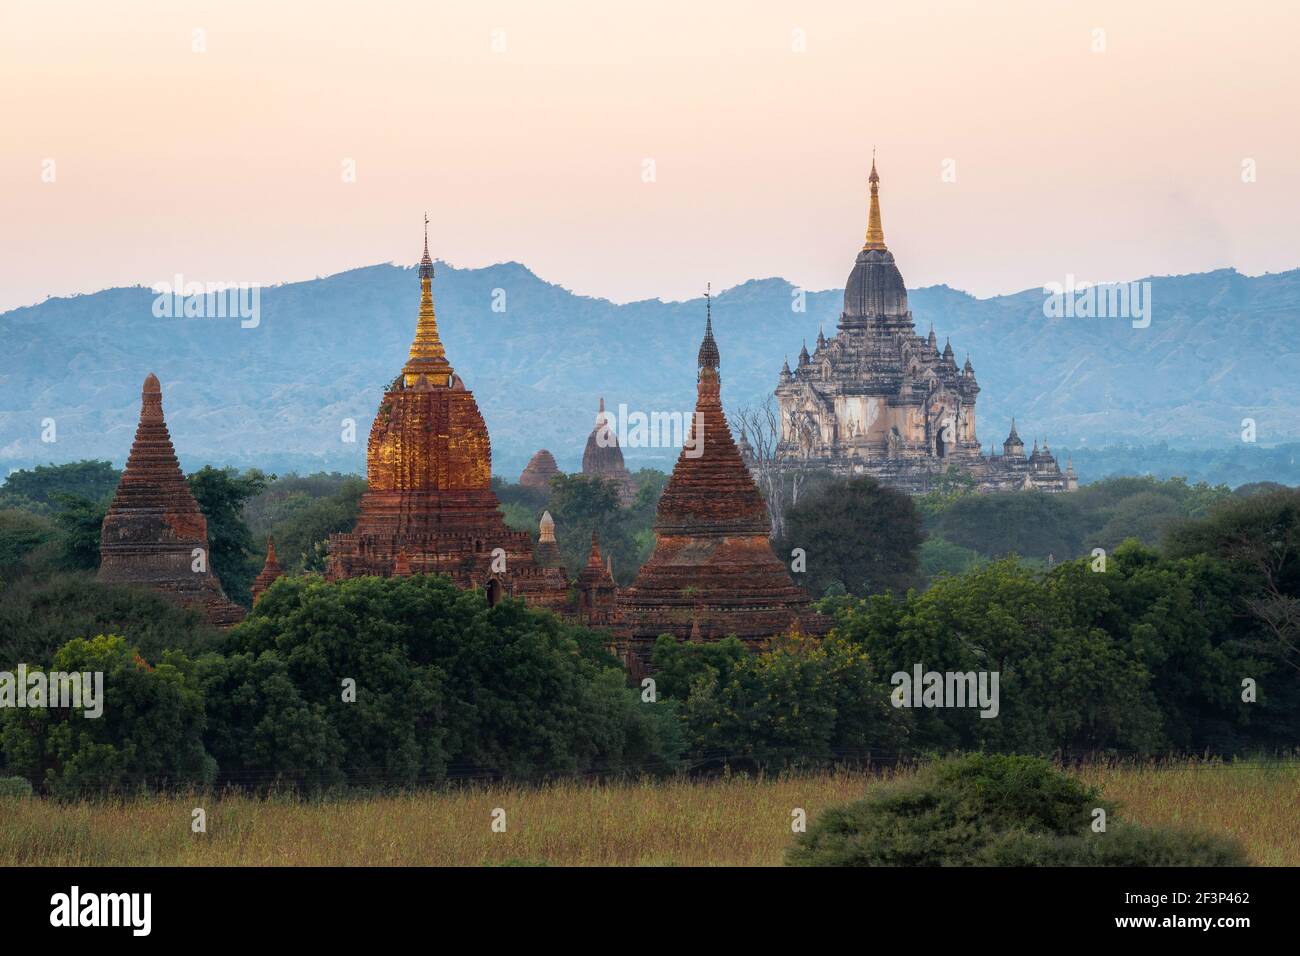 Ancient Buddhist temples at sunset in Old Bagan, Myanmar (Burma). Stock Photo